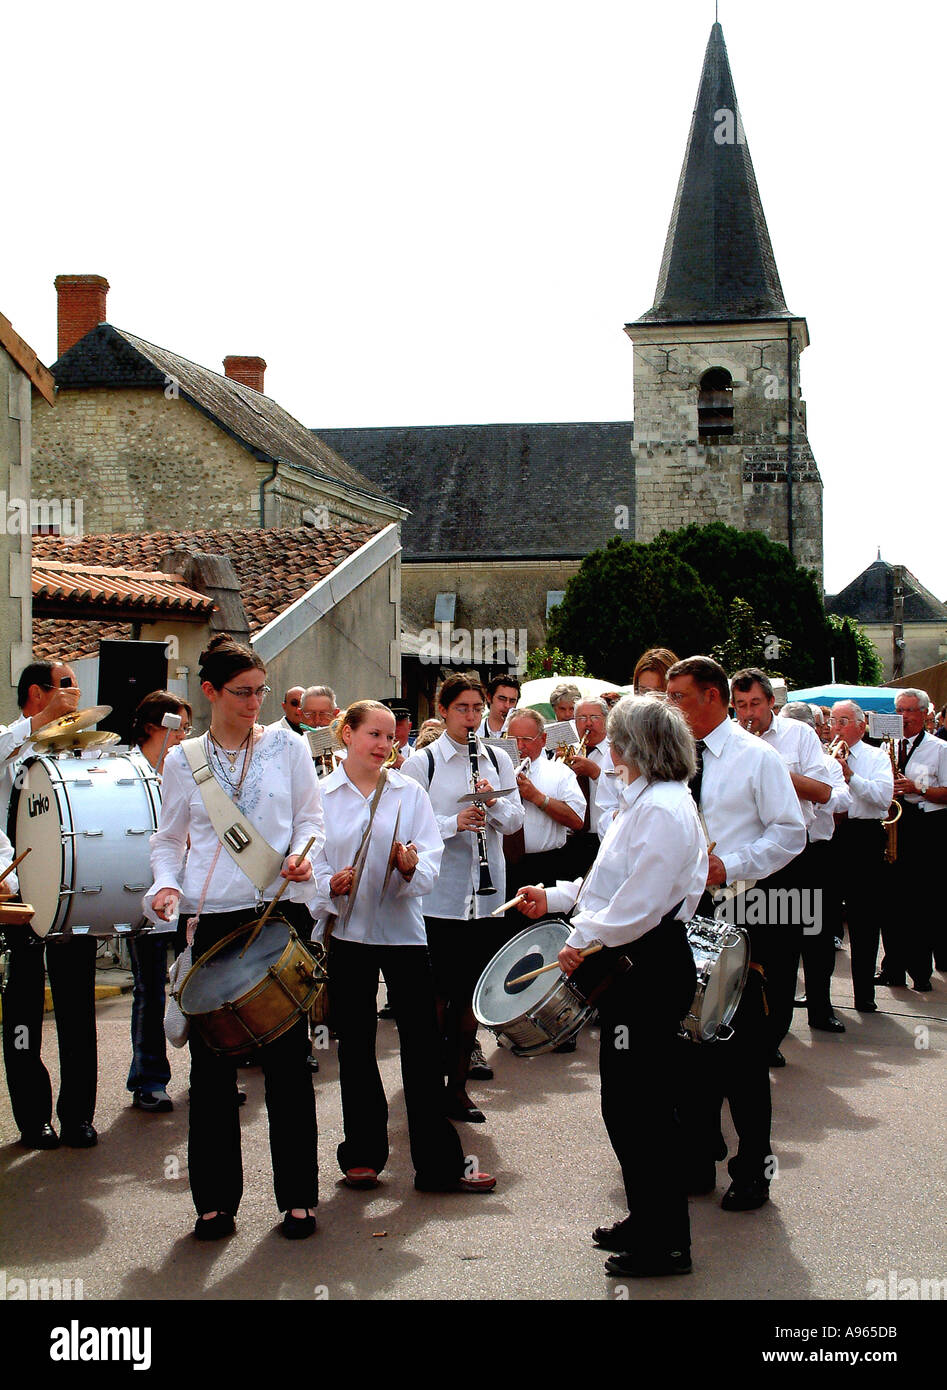 Brass Band in the village of Braslou in the Touraine region of France Stock Photo